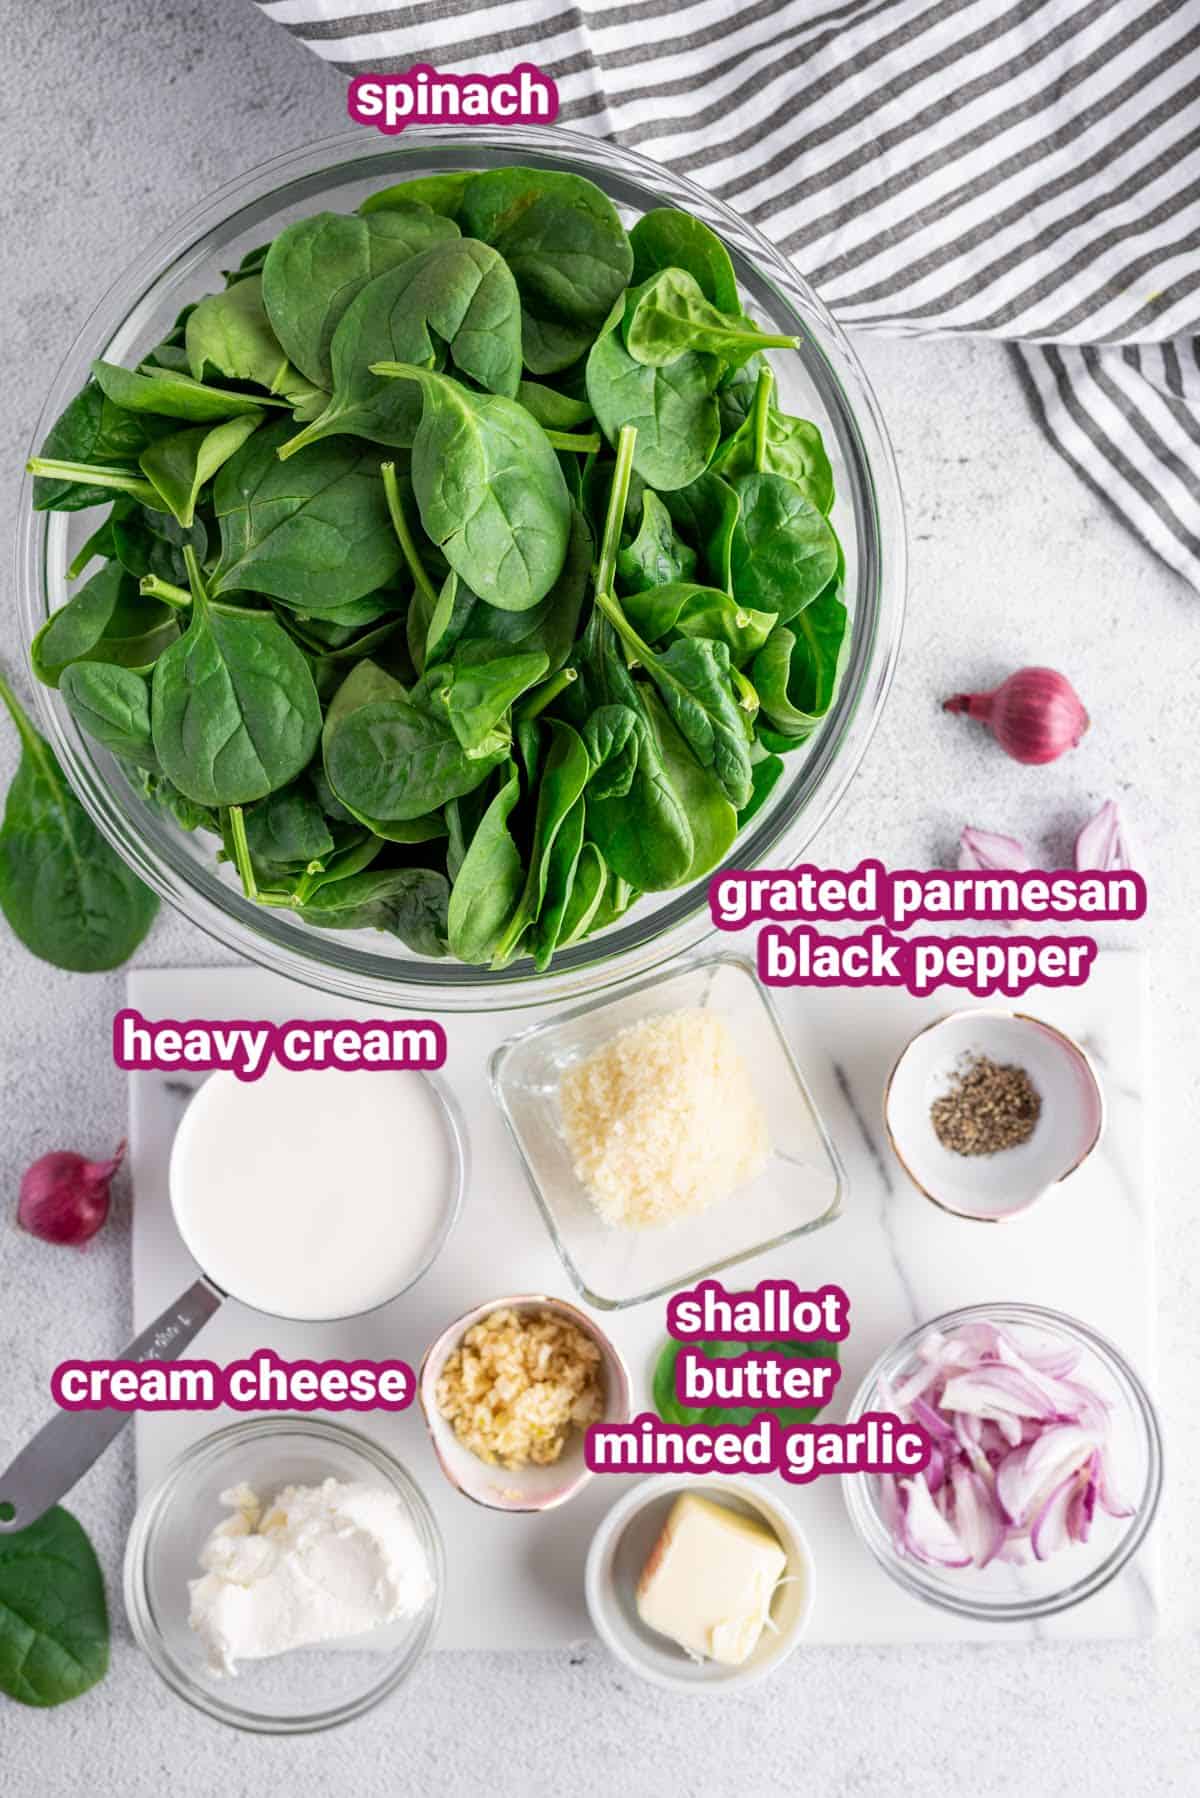 a photo of the ingredients for this keto creamed spinach recipe like spinach, heavy cream, grated parmesan, cream cheese, shallots, butter, minced, small pieces of garlic, and black pepper.